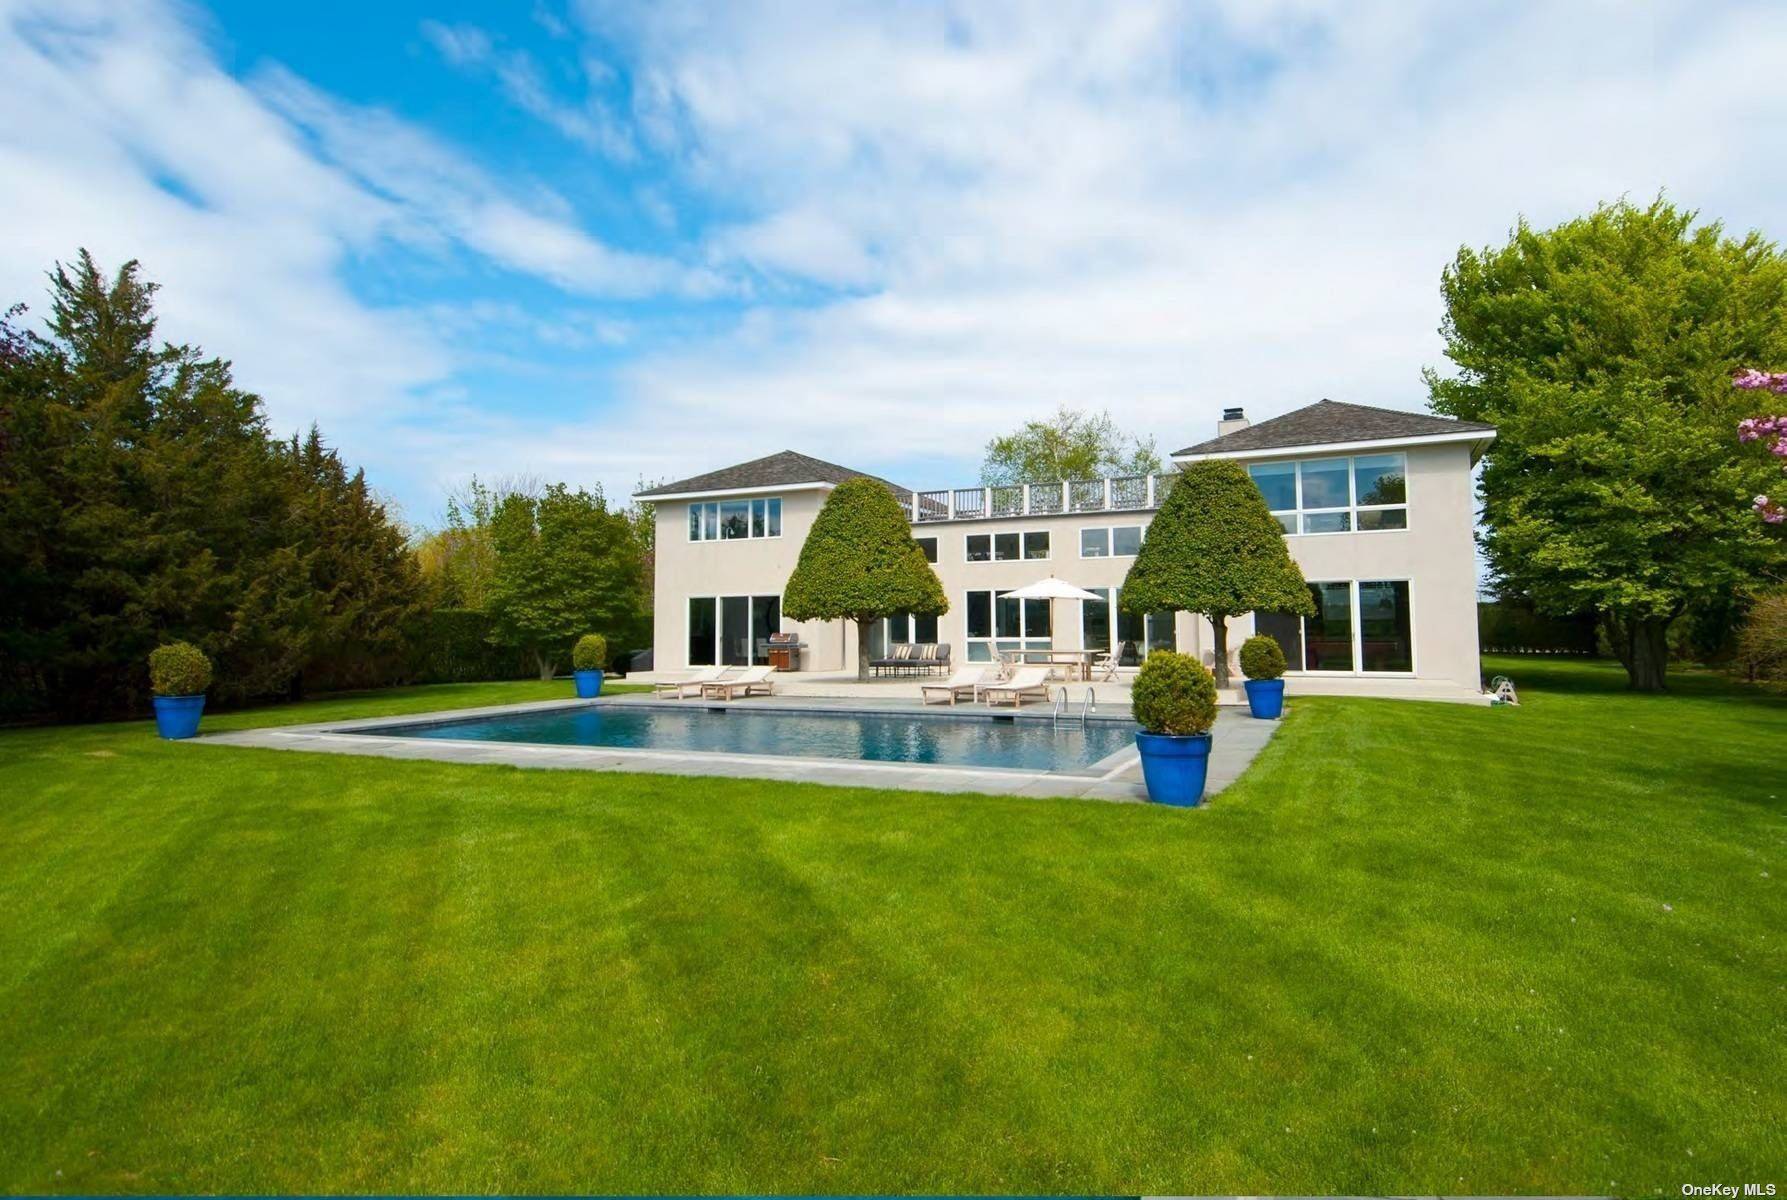 Backing an expansive and open 34 acre reserve, this modern residence combines a sleek yet elegant design along with state of the art amenities in an exceptional location overlooking Hayground ...